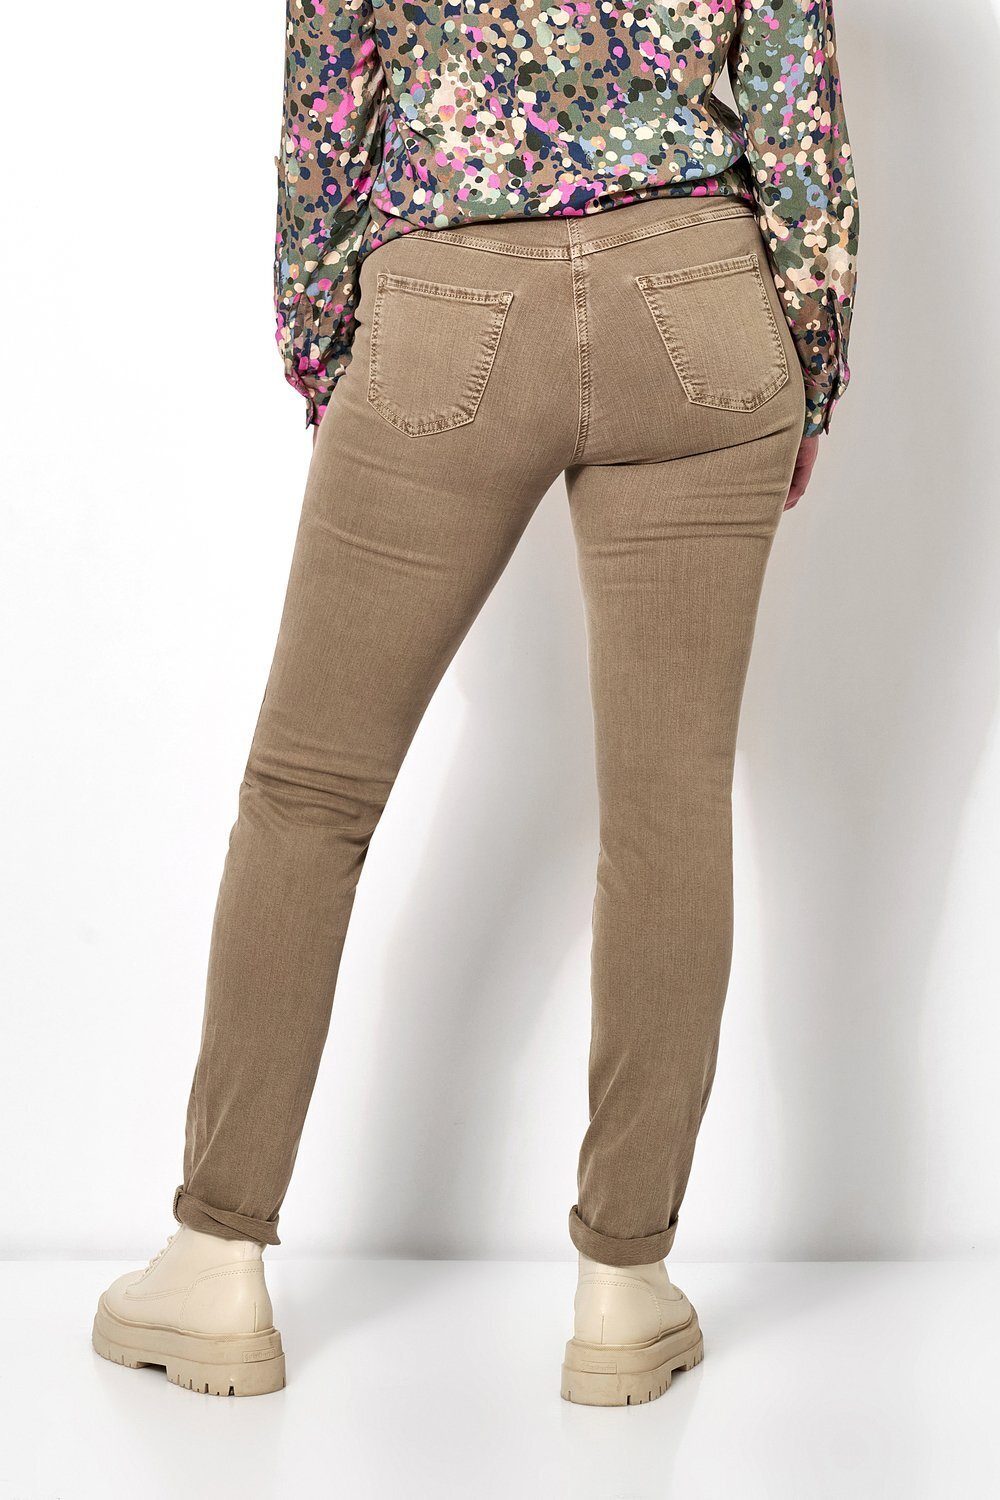 Relaxed by TONI TONI Slim-fit-Jeans vorne Shape taupe 723 mit Hüftsattel Perfect 